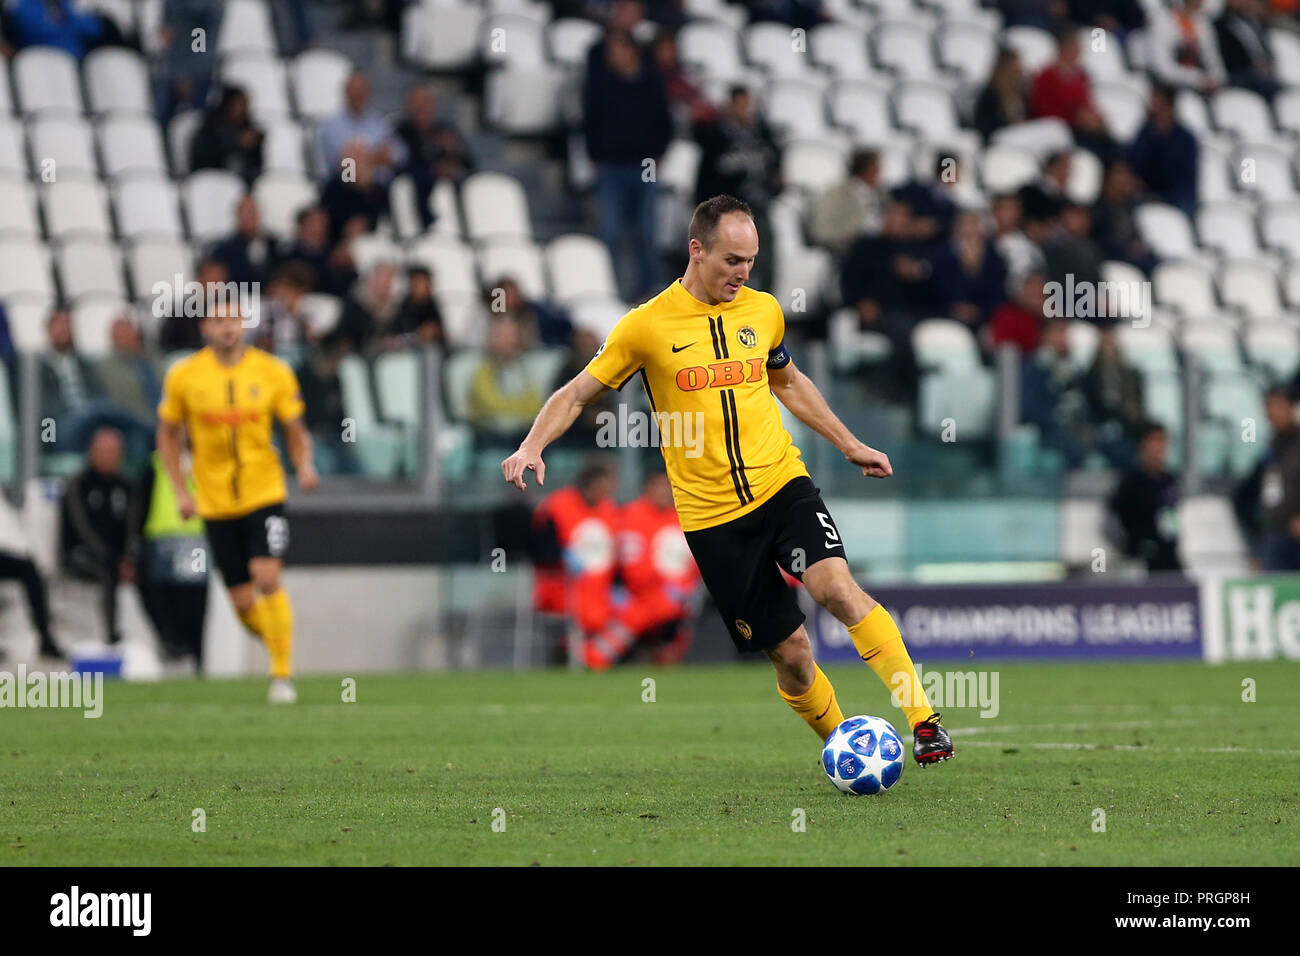 Torino, Italy. 02th October 2018.  Steve von Bergen  of Berner Sport Club Young Boys in action during the Uefa Champions League Group H match between Juventus Fc and Berner Sport Club Young Boys. Credit: Marco Canoniero/Alamy Live News Stock Photo